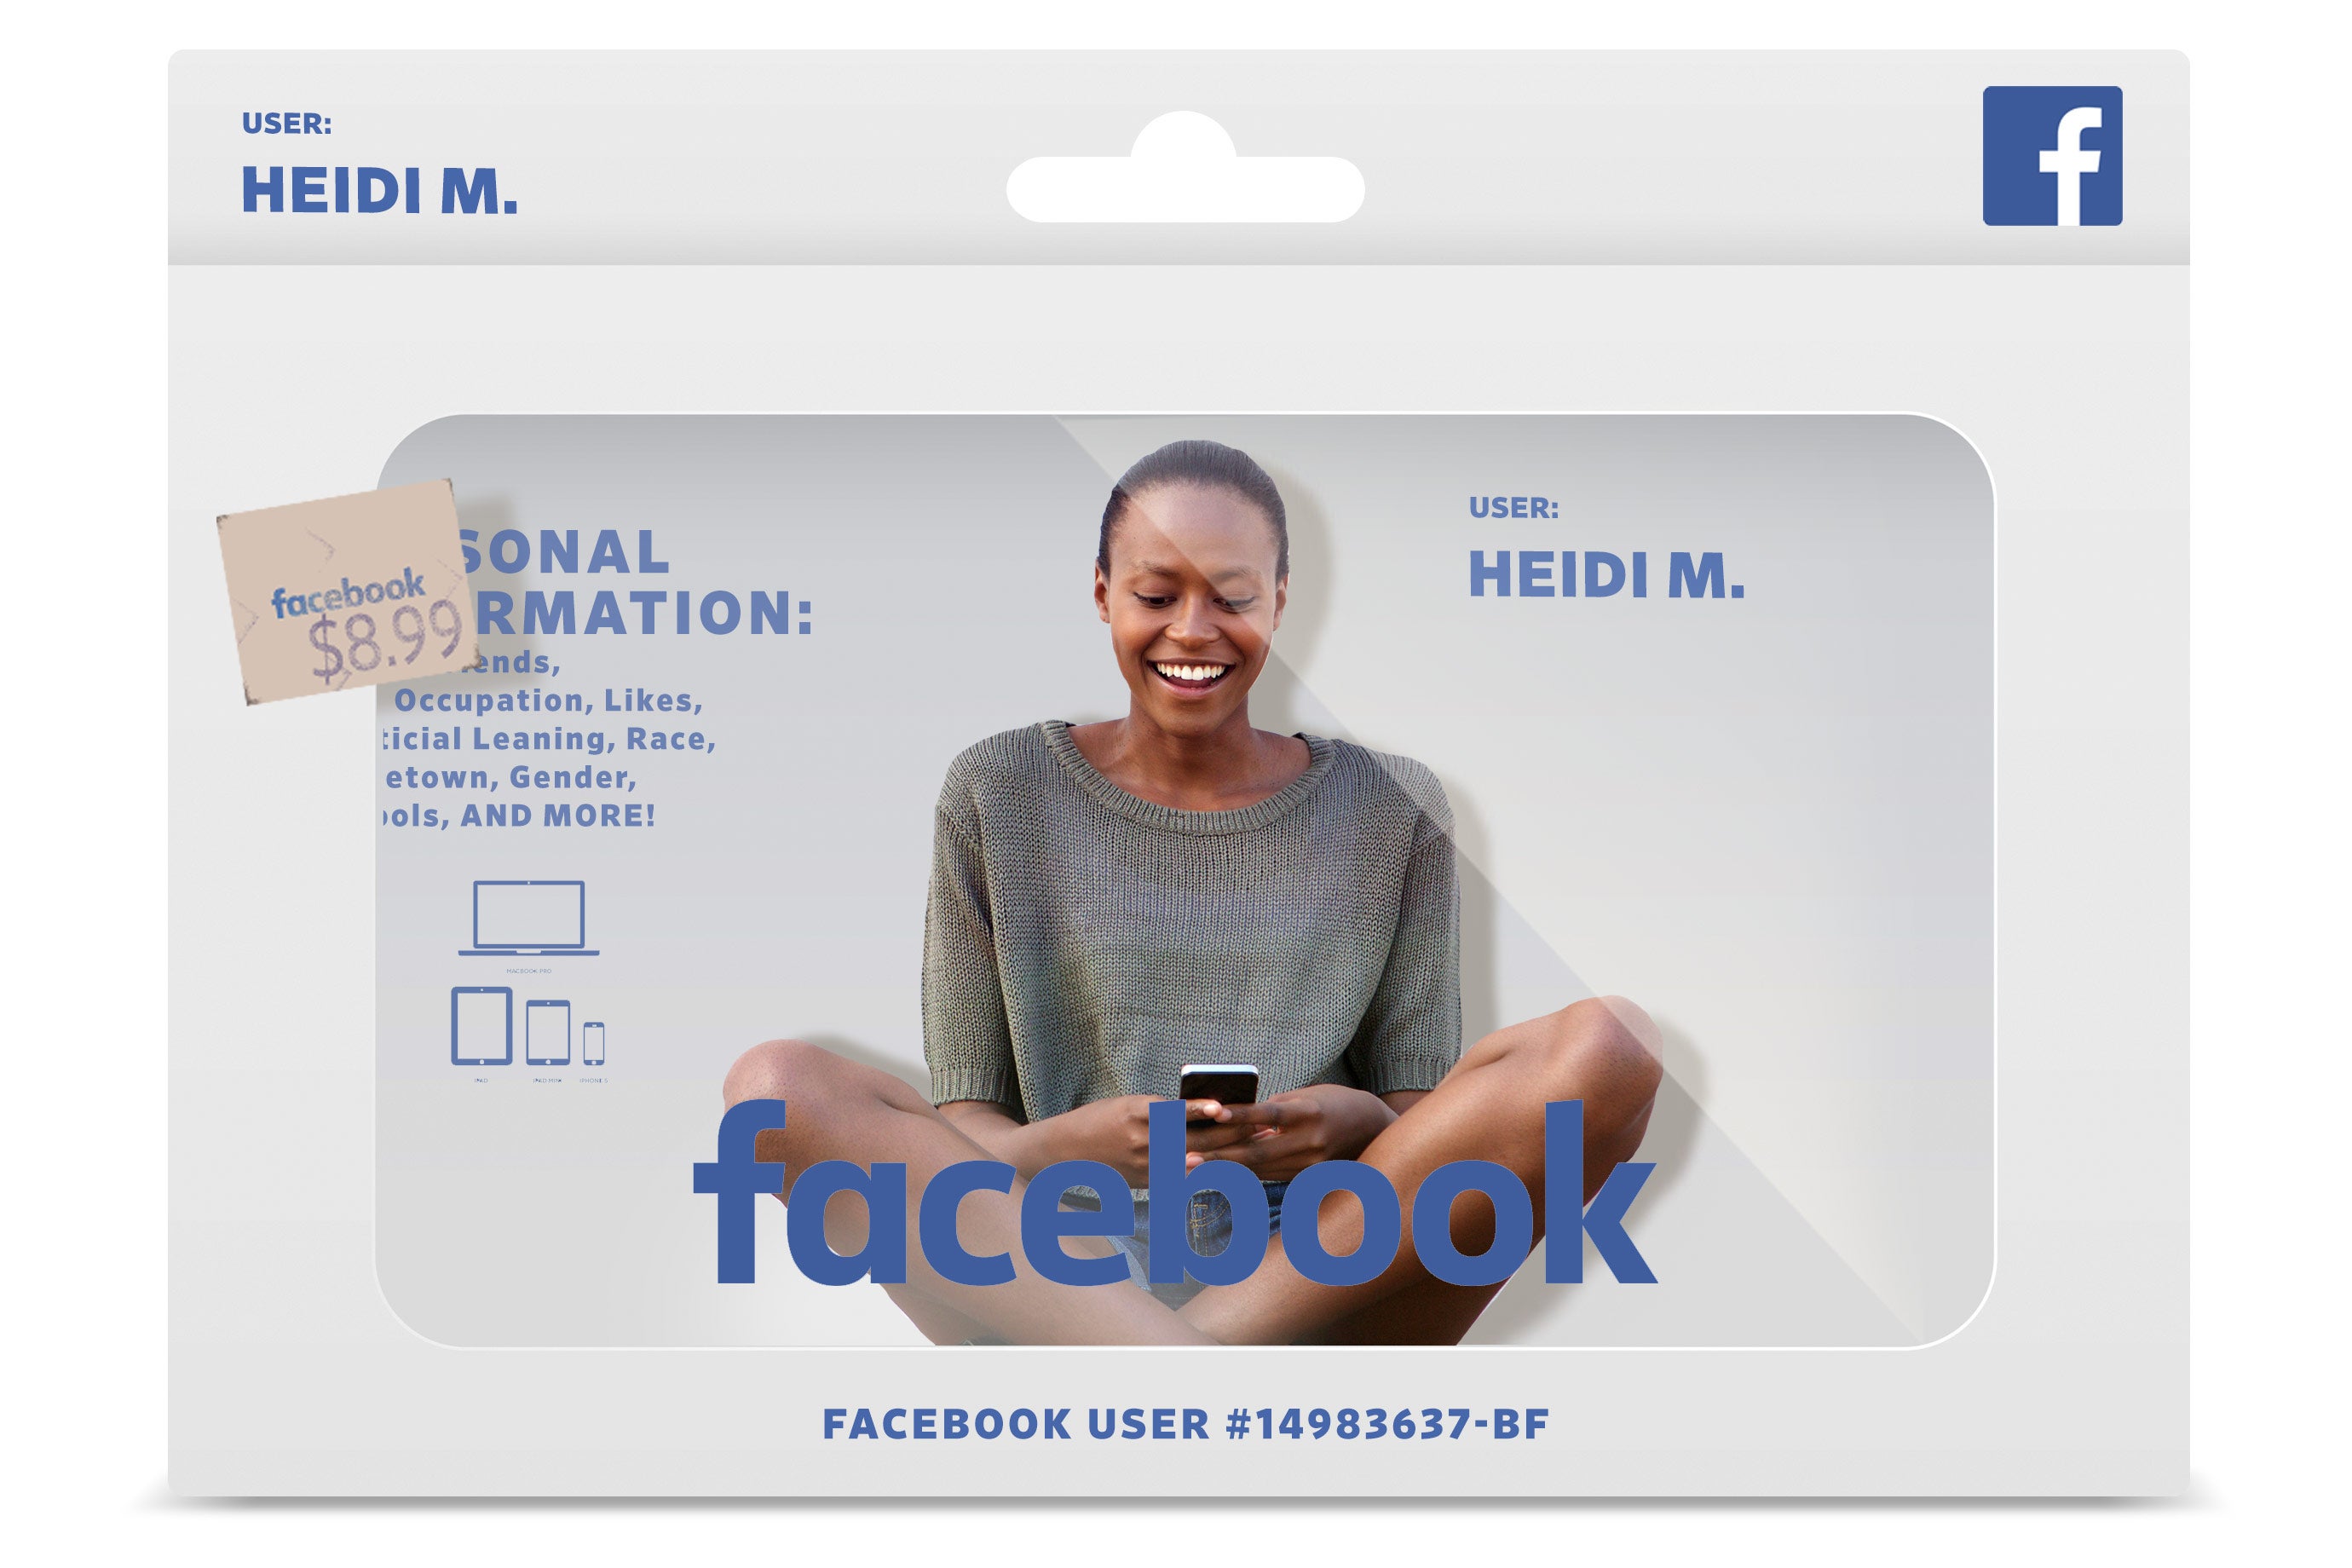 You are the Facebook product.